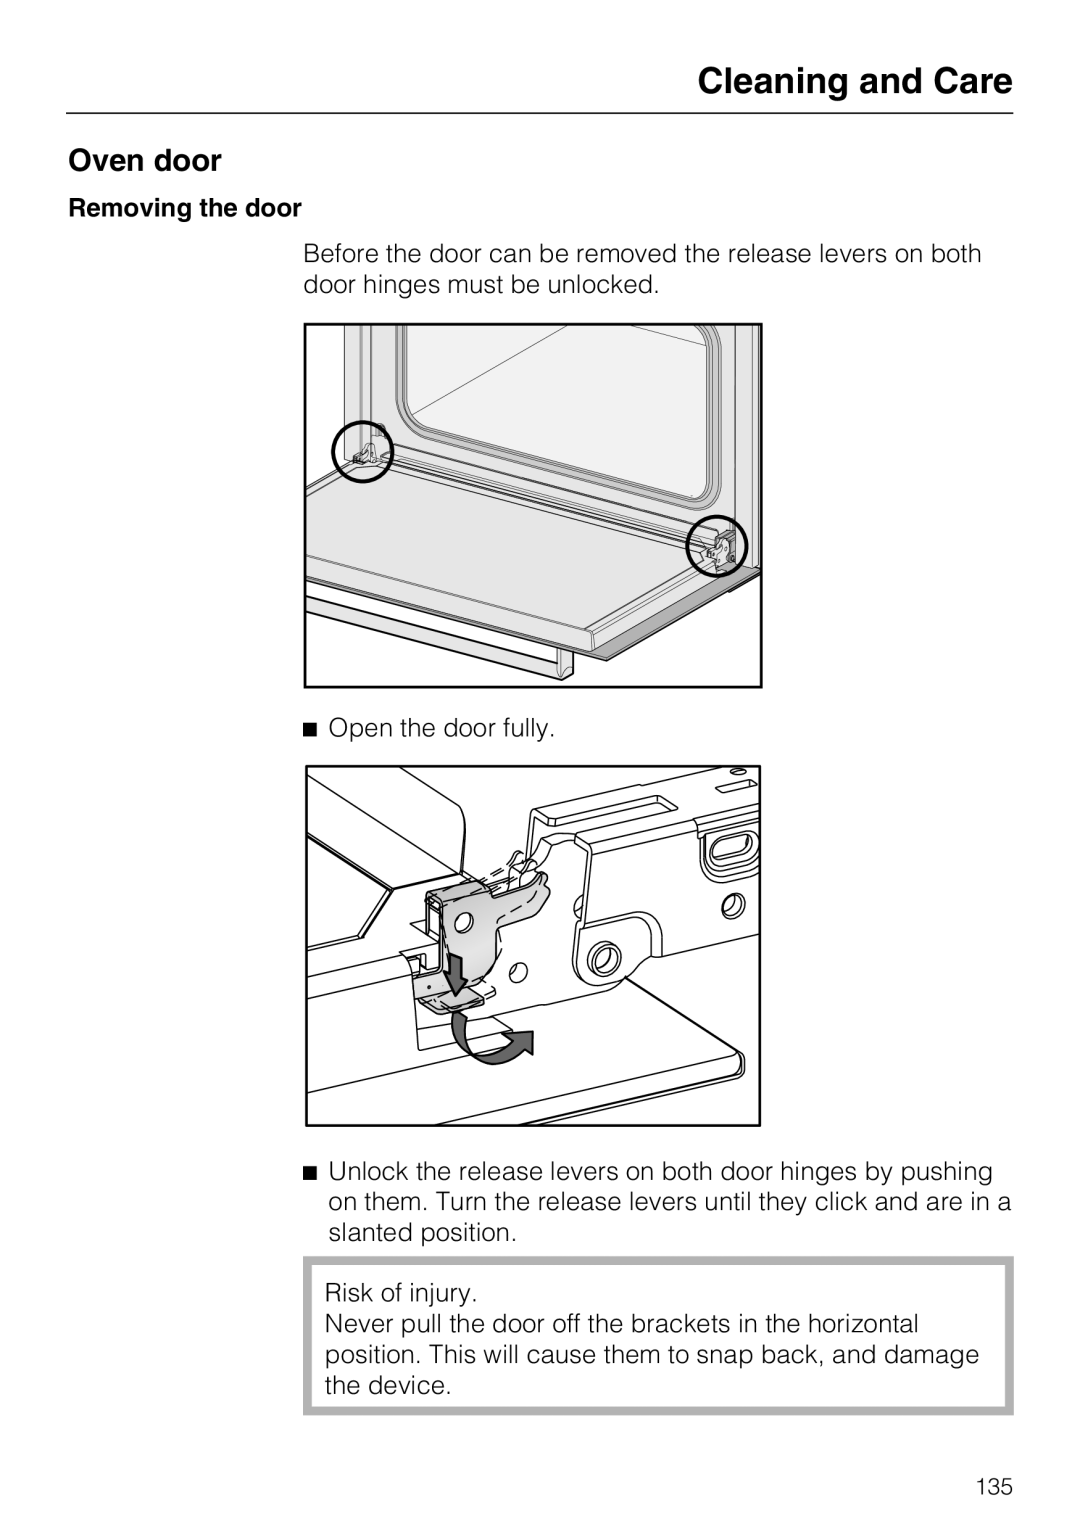 Miele 09 855 050 installation instructions Oven door, Cleaning and Care, Removing the door 